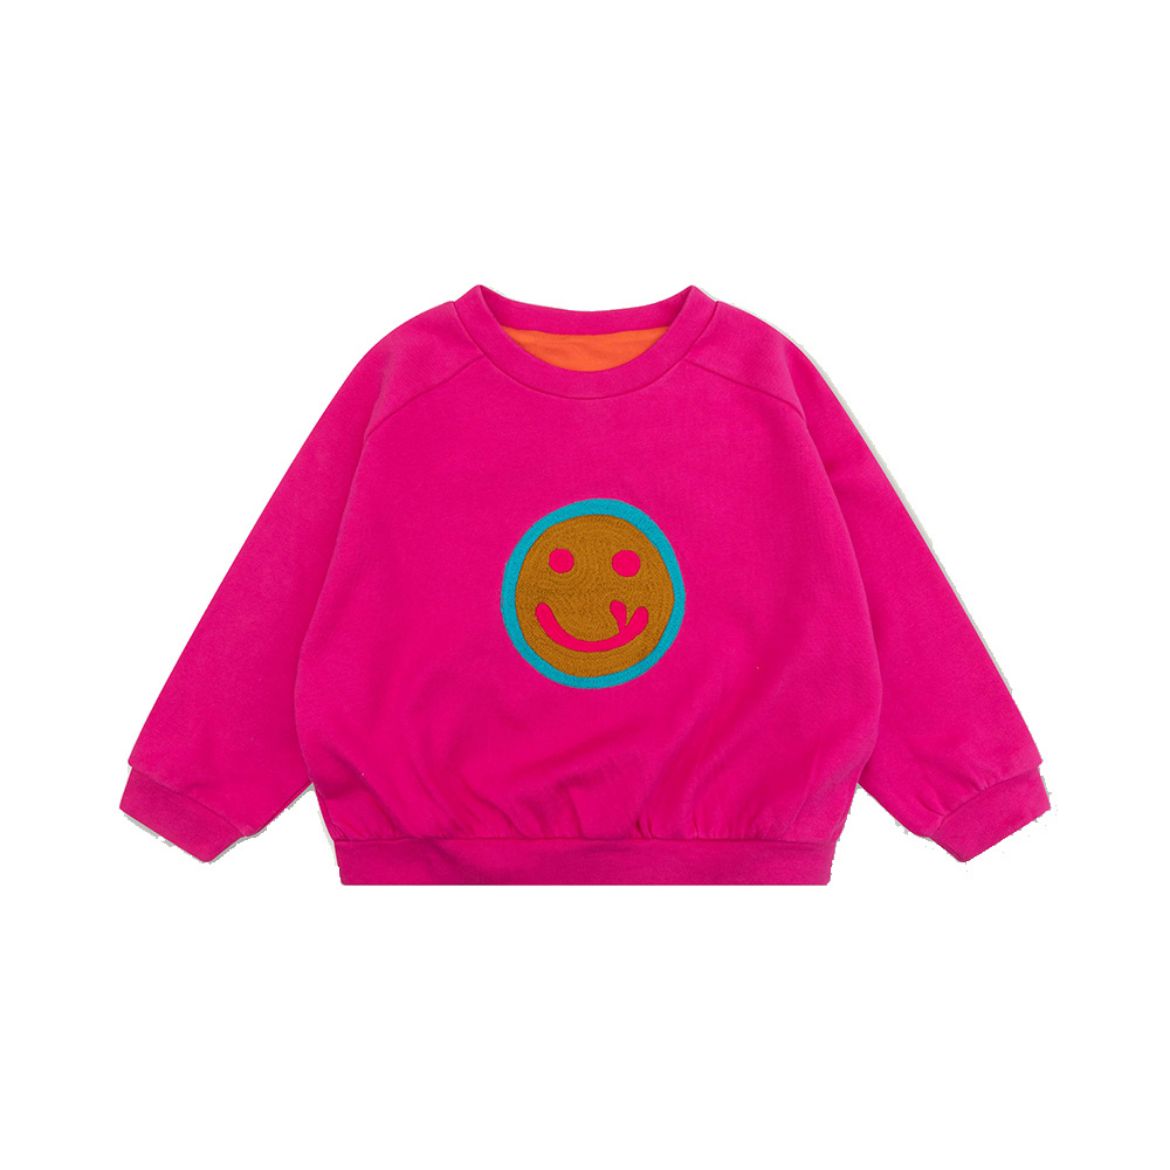 Picture of Oilily Girls 'Haisley' Pink Sweatshirt